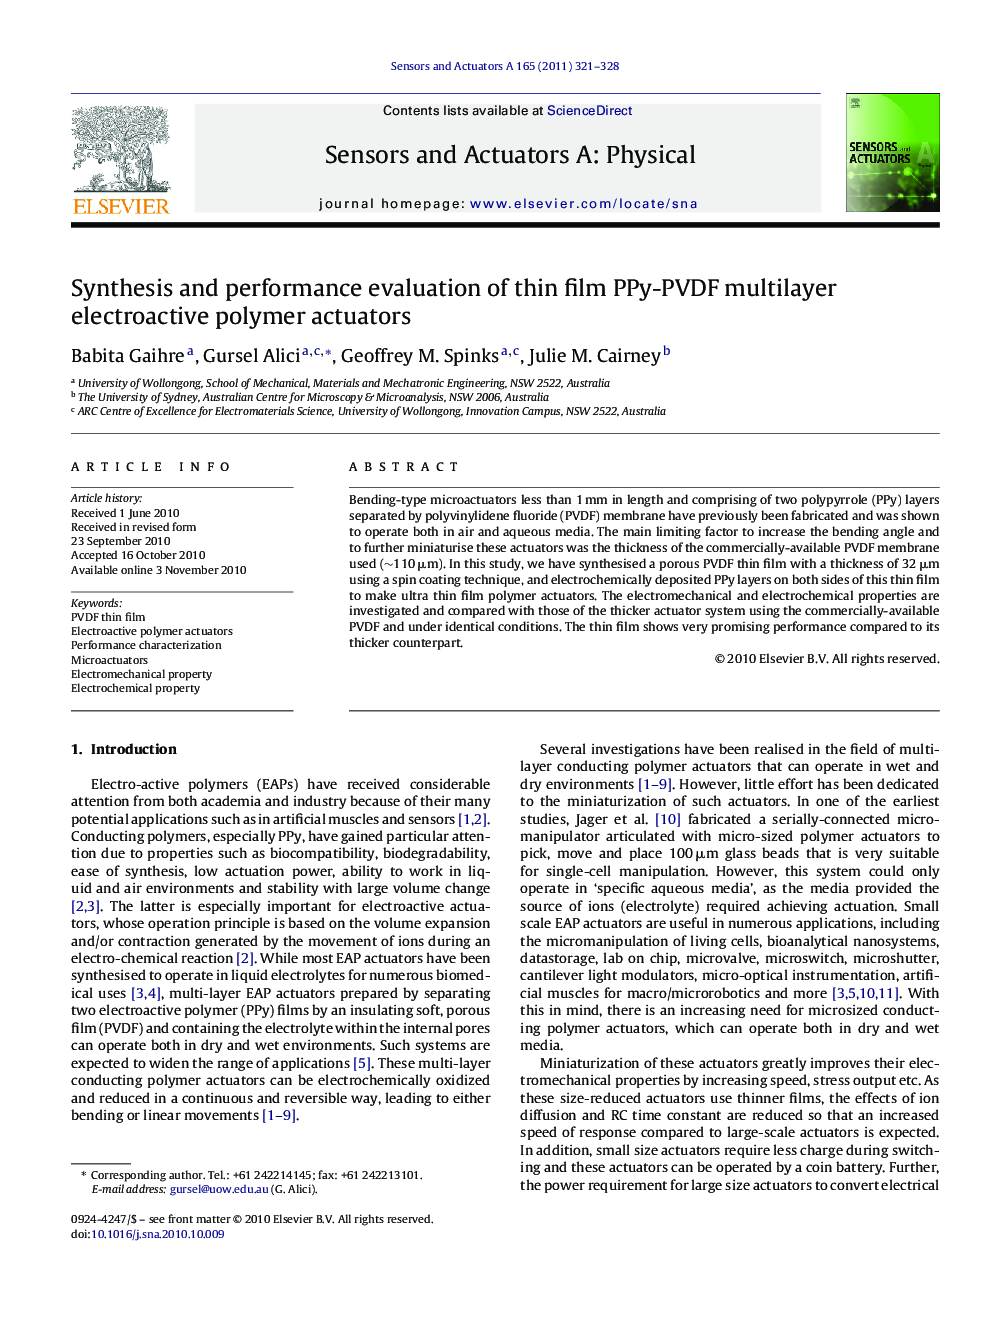 Synthesis and performance evaluation of thin film PPy-PVDF multilayer electroactive polymer actuators